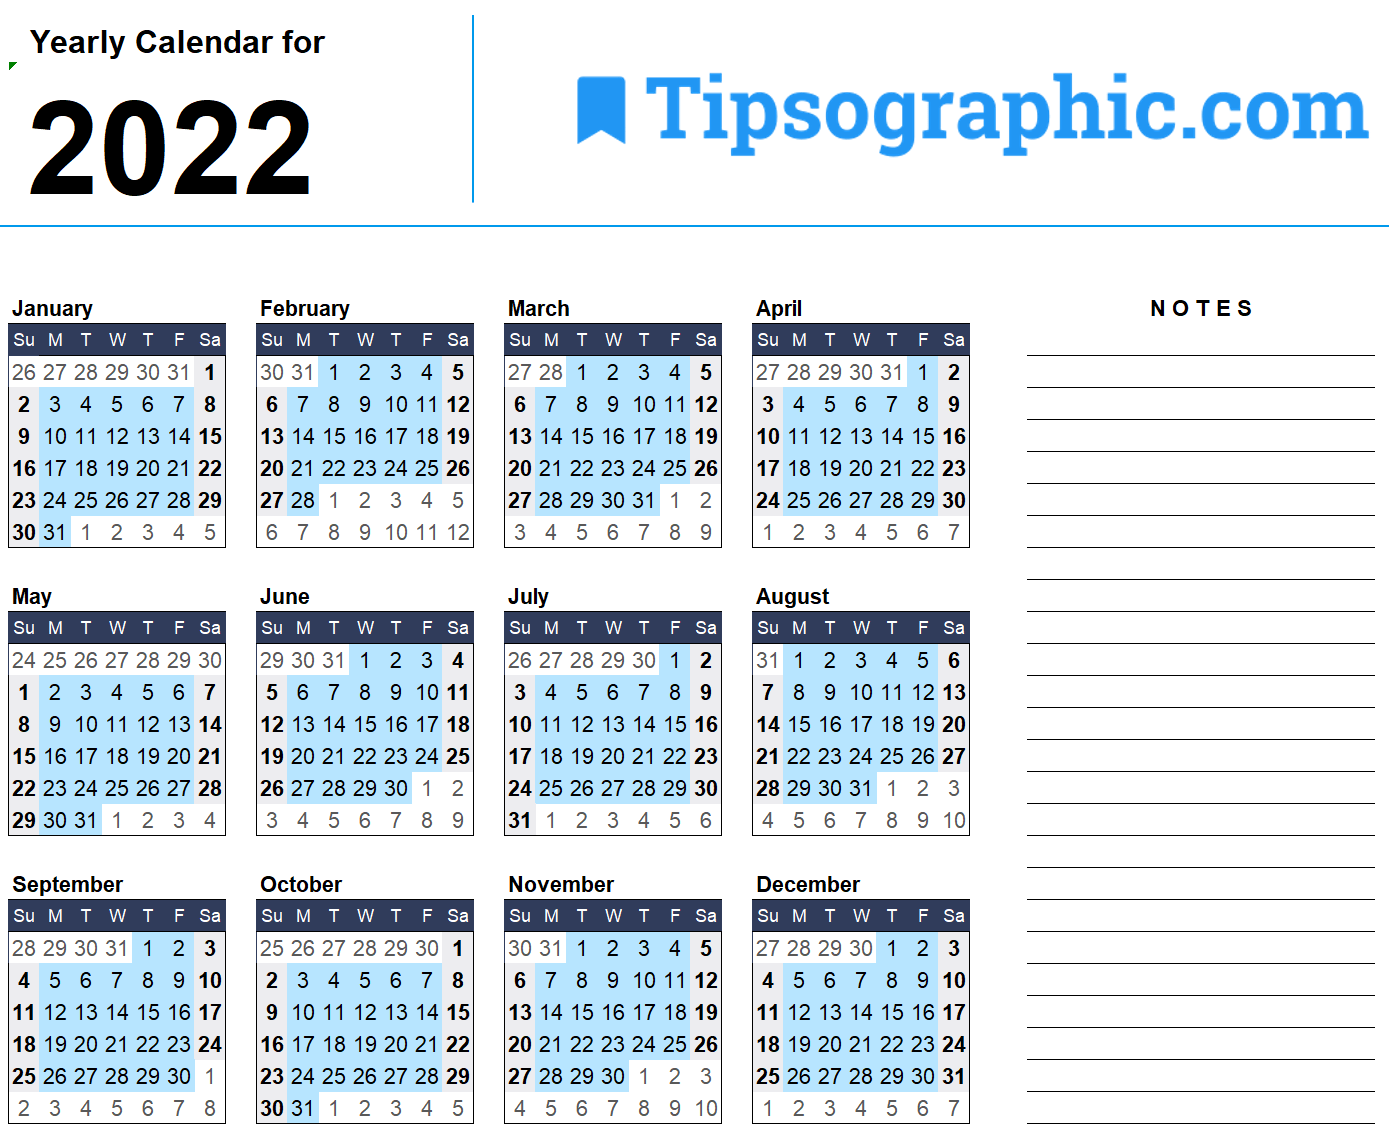 2022 calendar templates images tipsographic